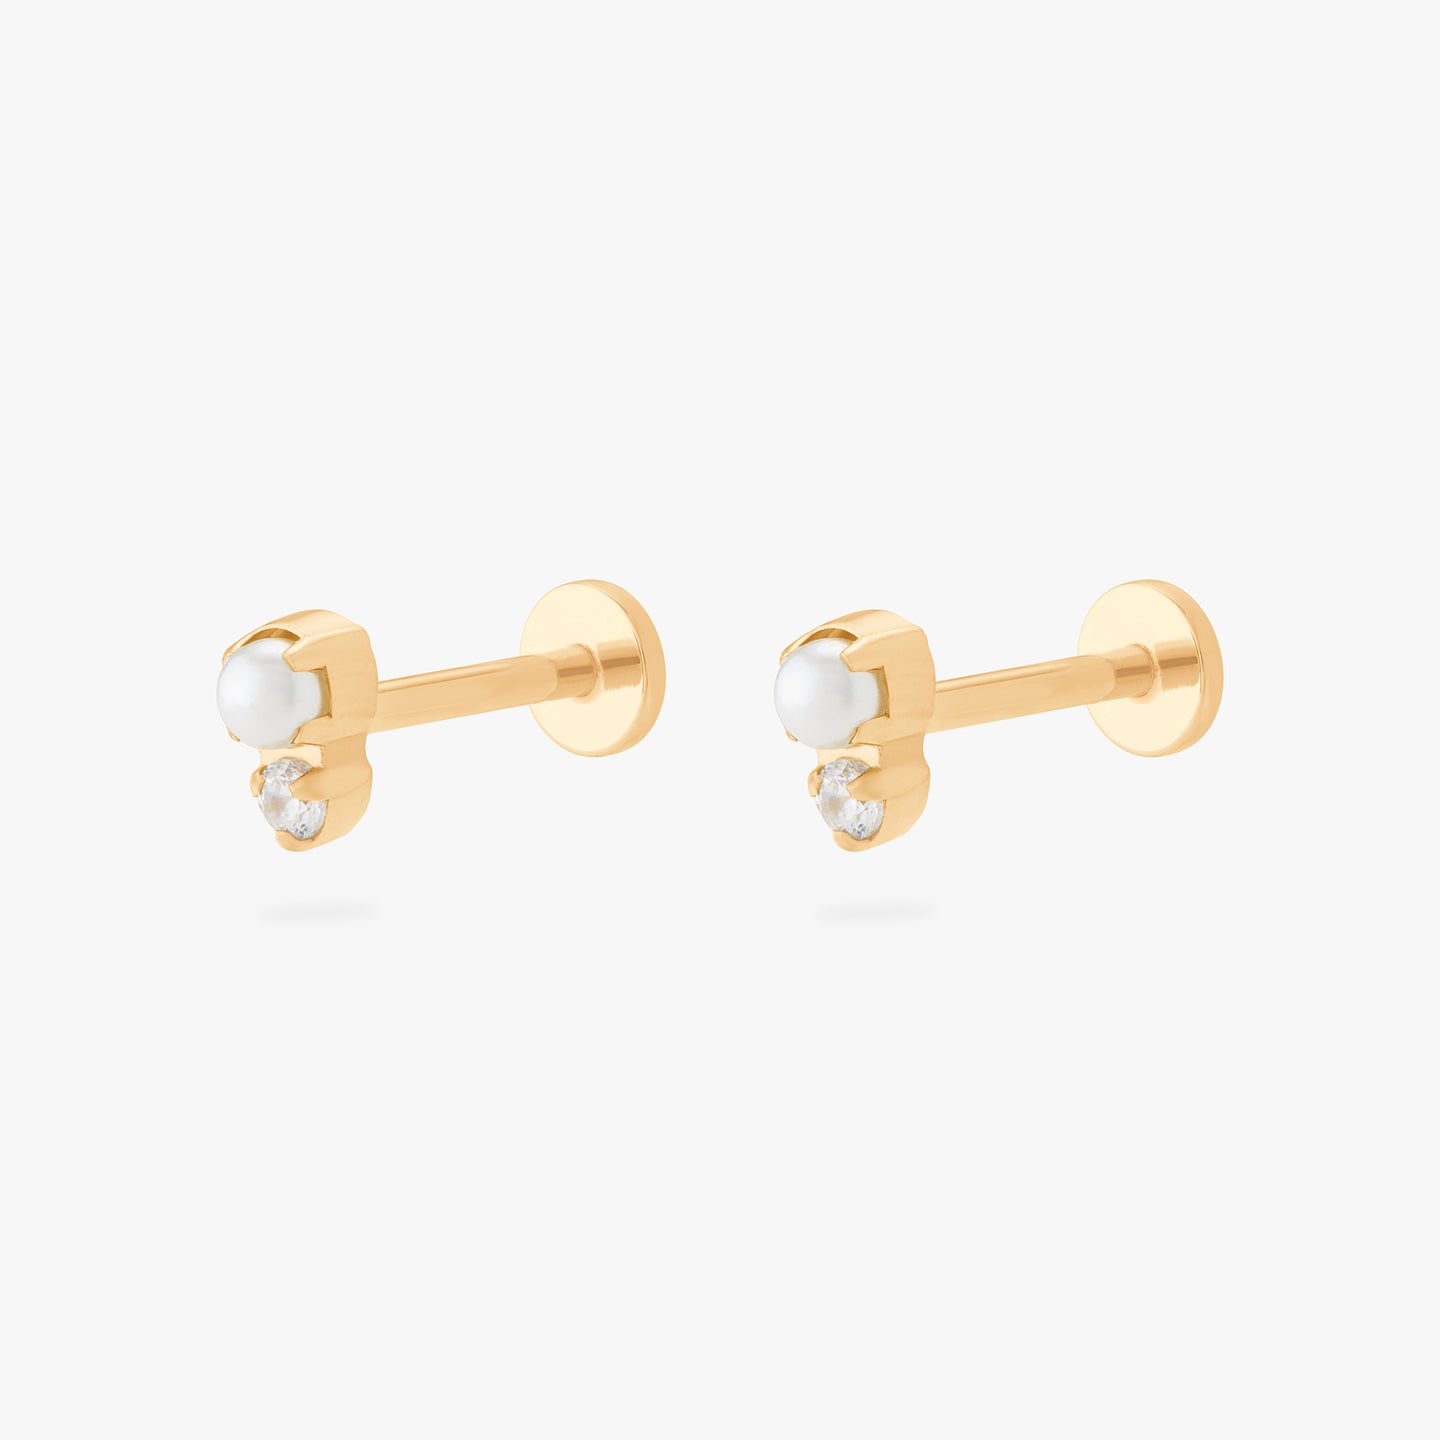 This is an image of a pair of flatback tops which have a pearl stacked over gold/clear CZs and then gold labrets that have circle discs with the 